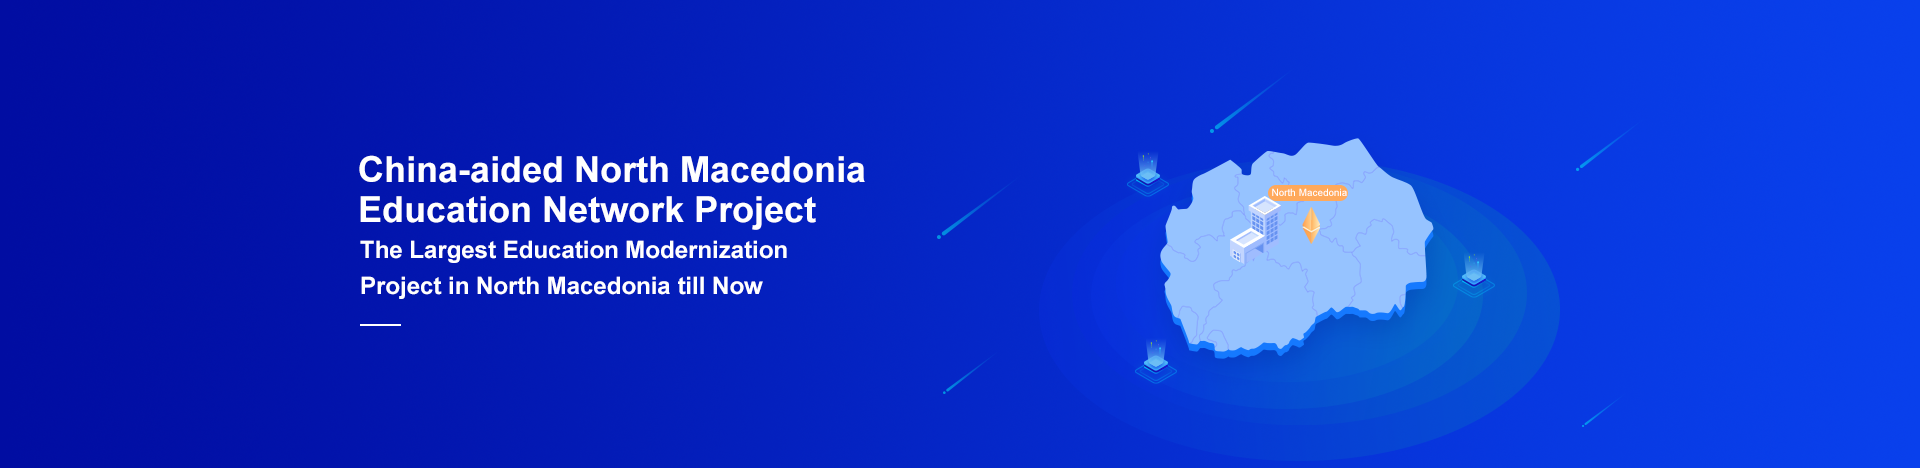 Southeast Europe·China-aided North Macedonia Education Network Project